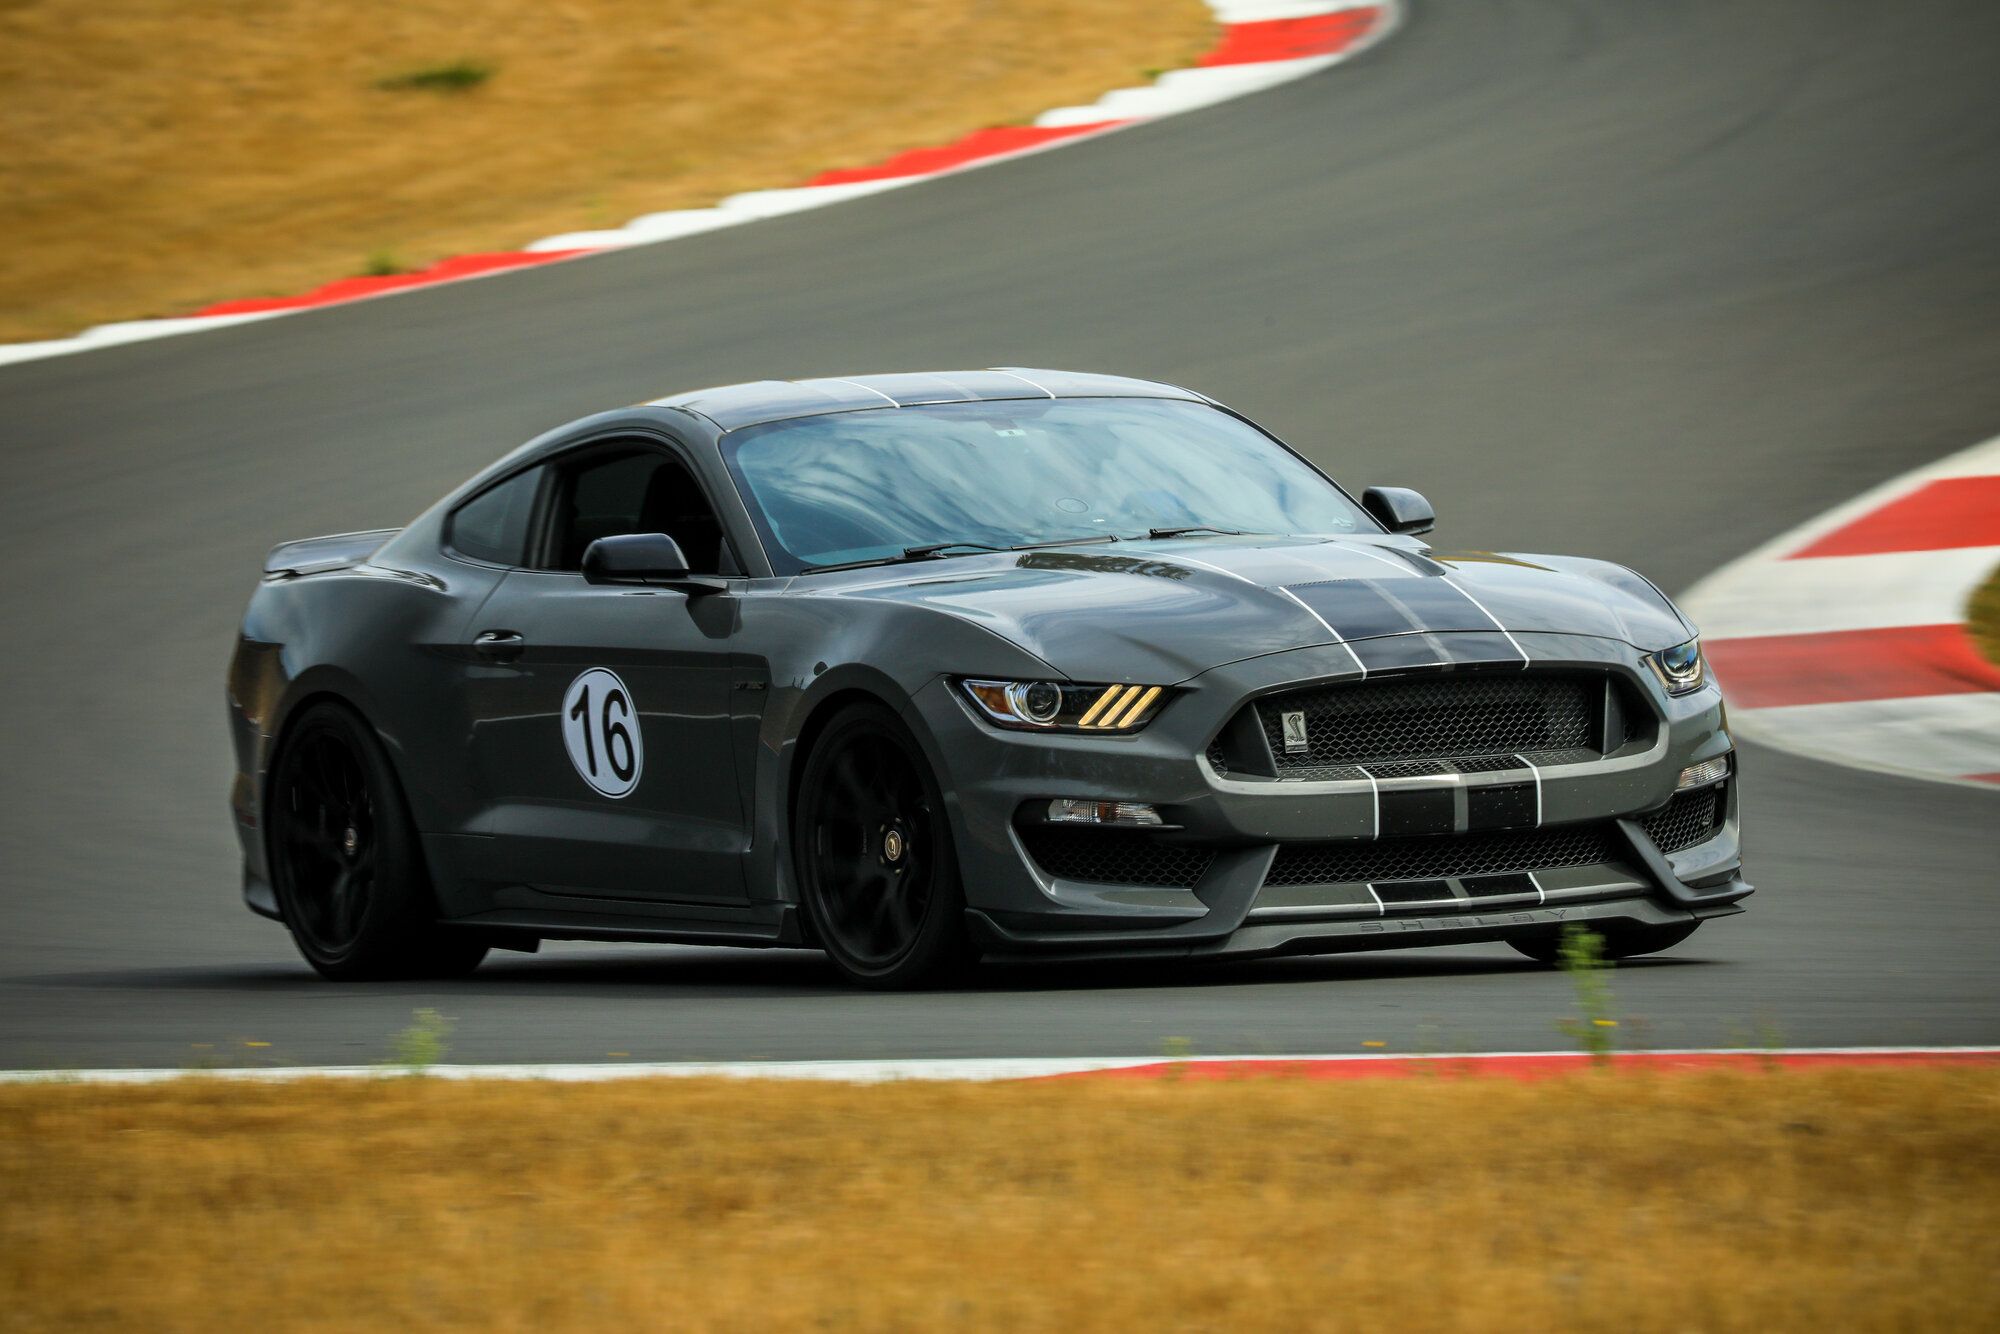 2018 Mustang
GT350 HPDE/Track -  (Leadfoot)